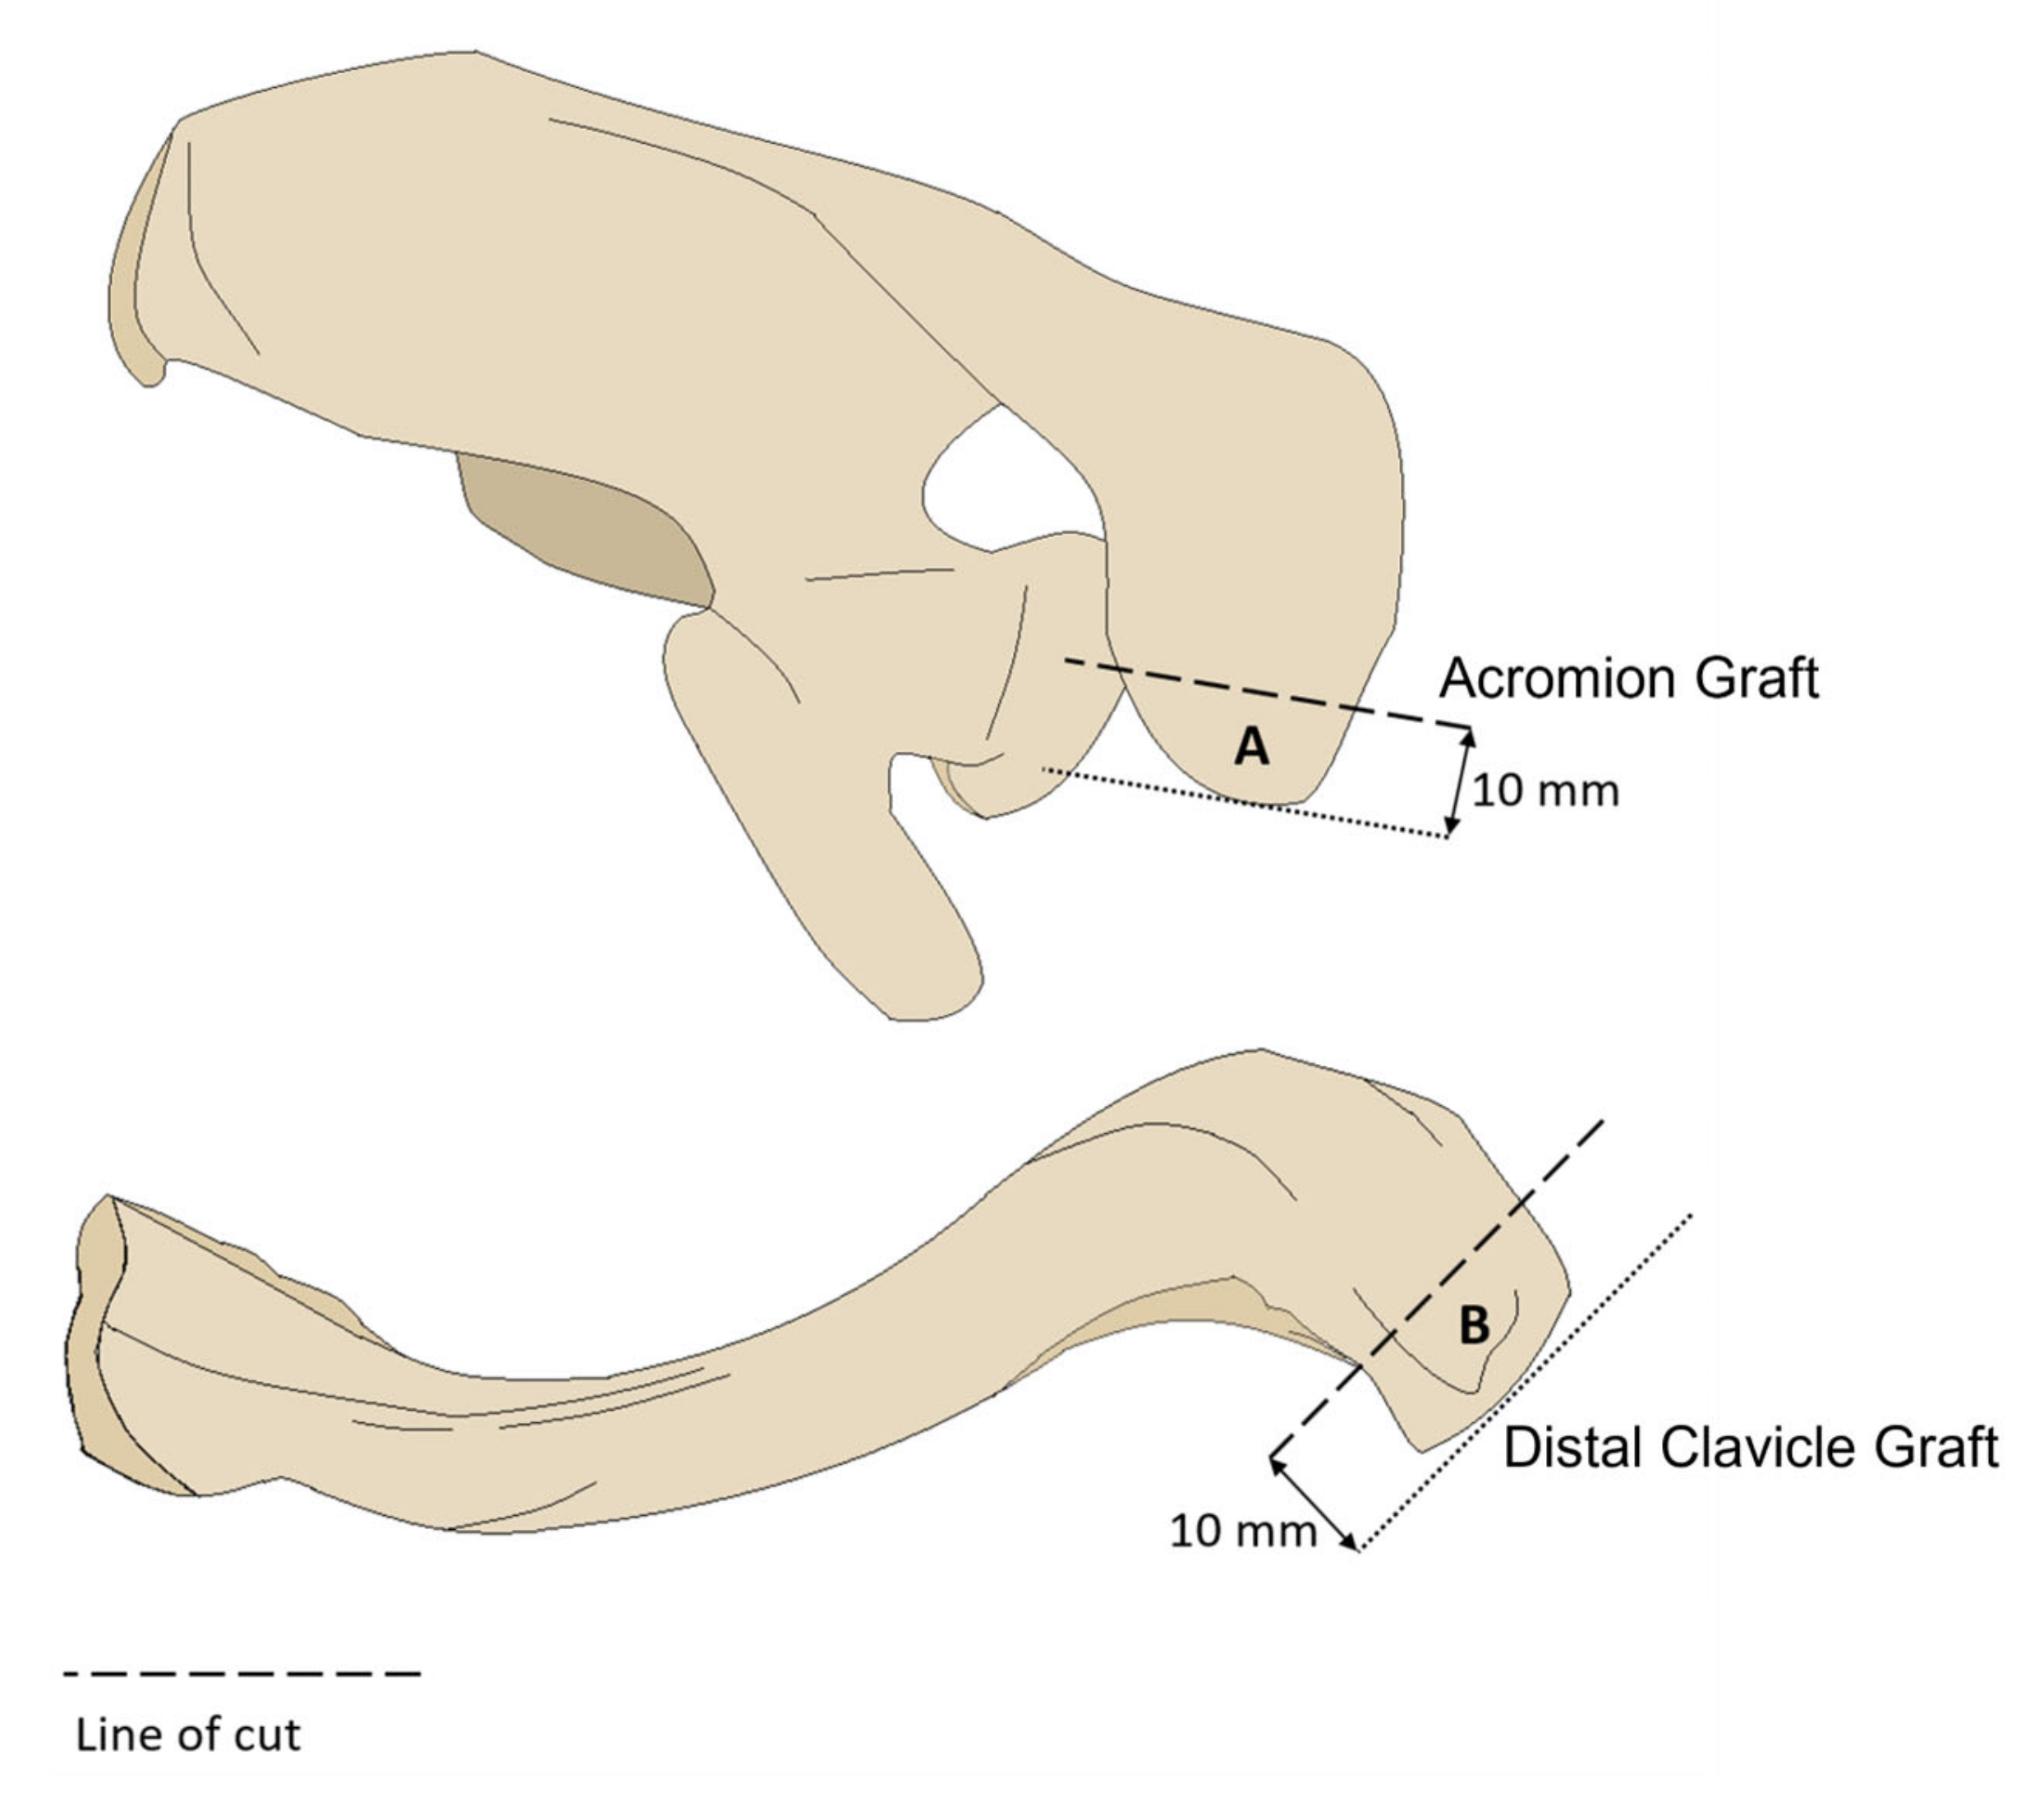 Jcm Free Full Text Acromion And Distal Clavicle Grafts For